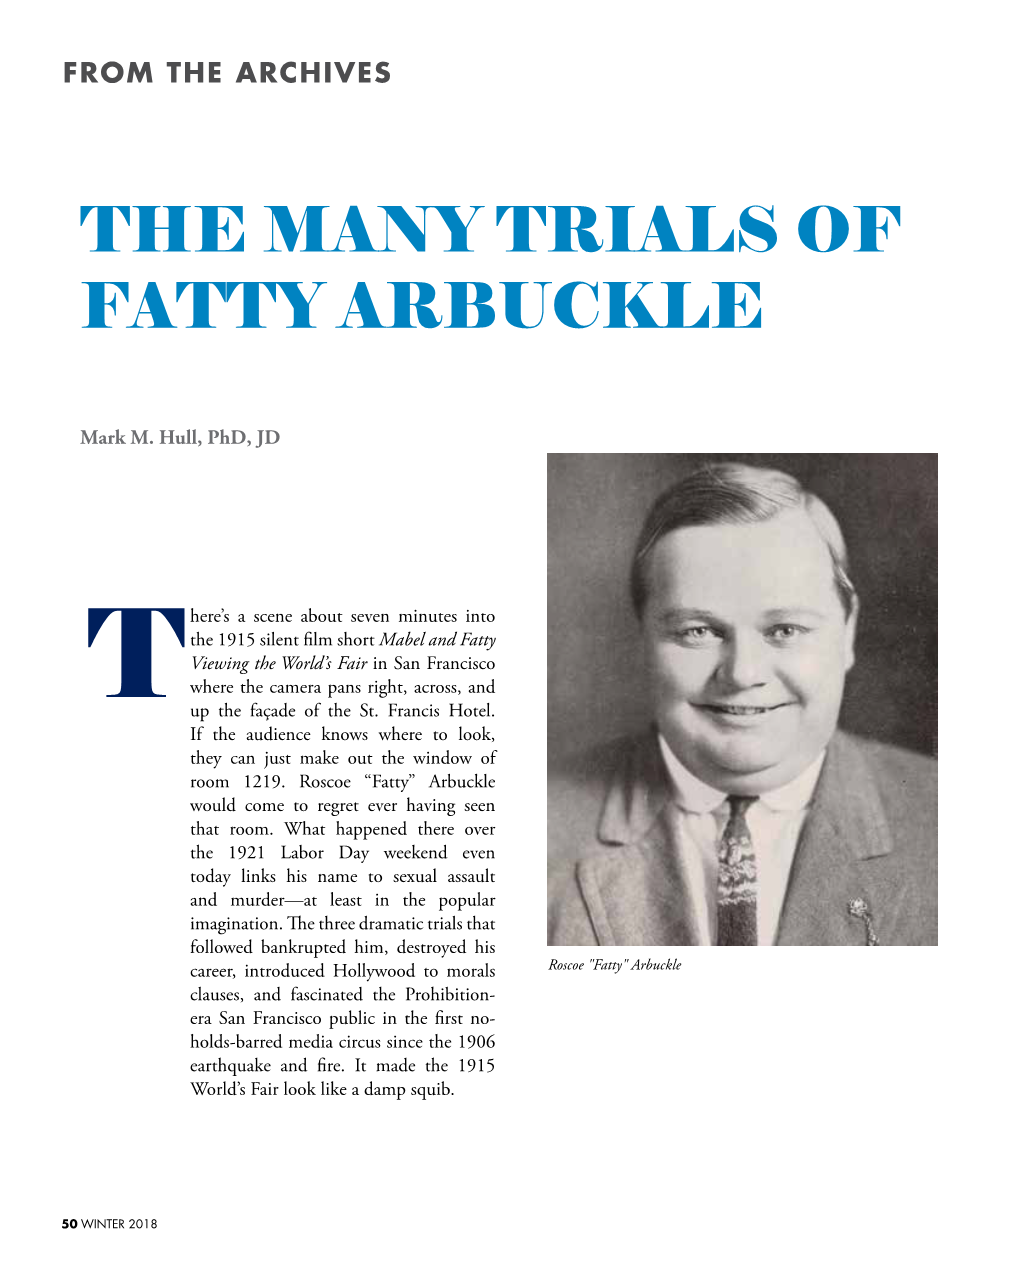 The Many Trials of Fatty Arbuckle